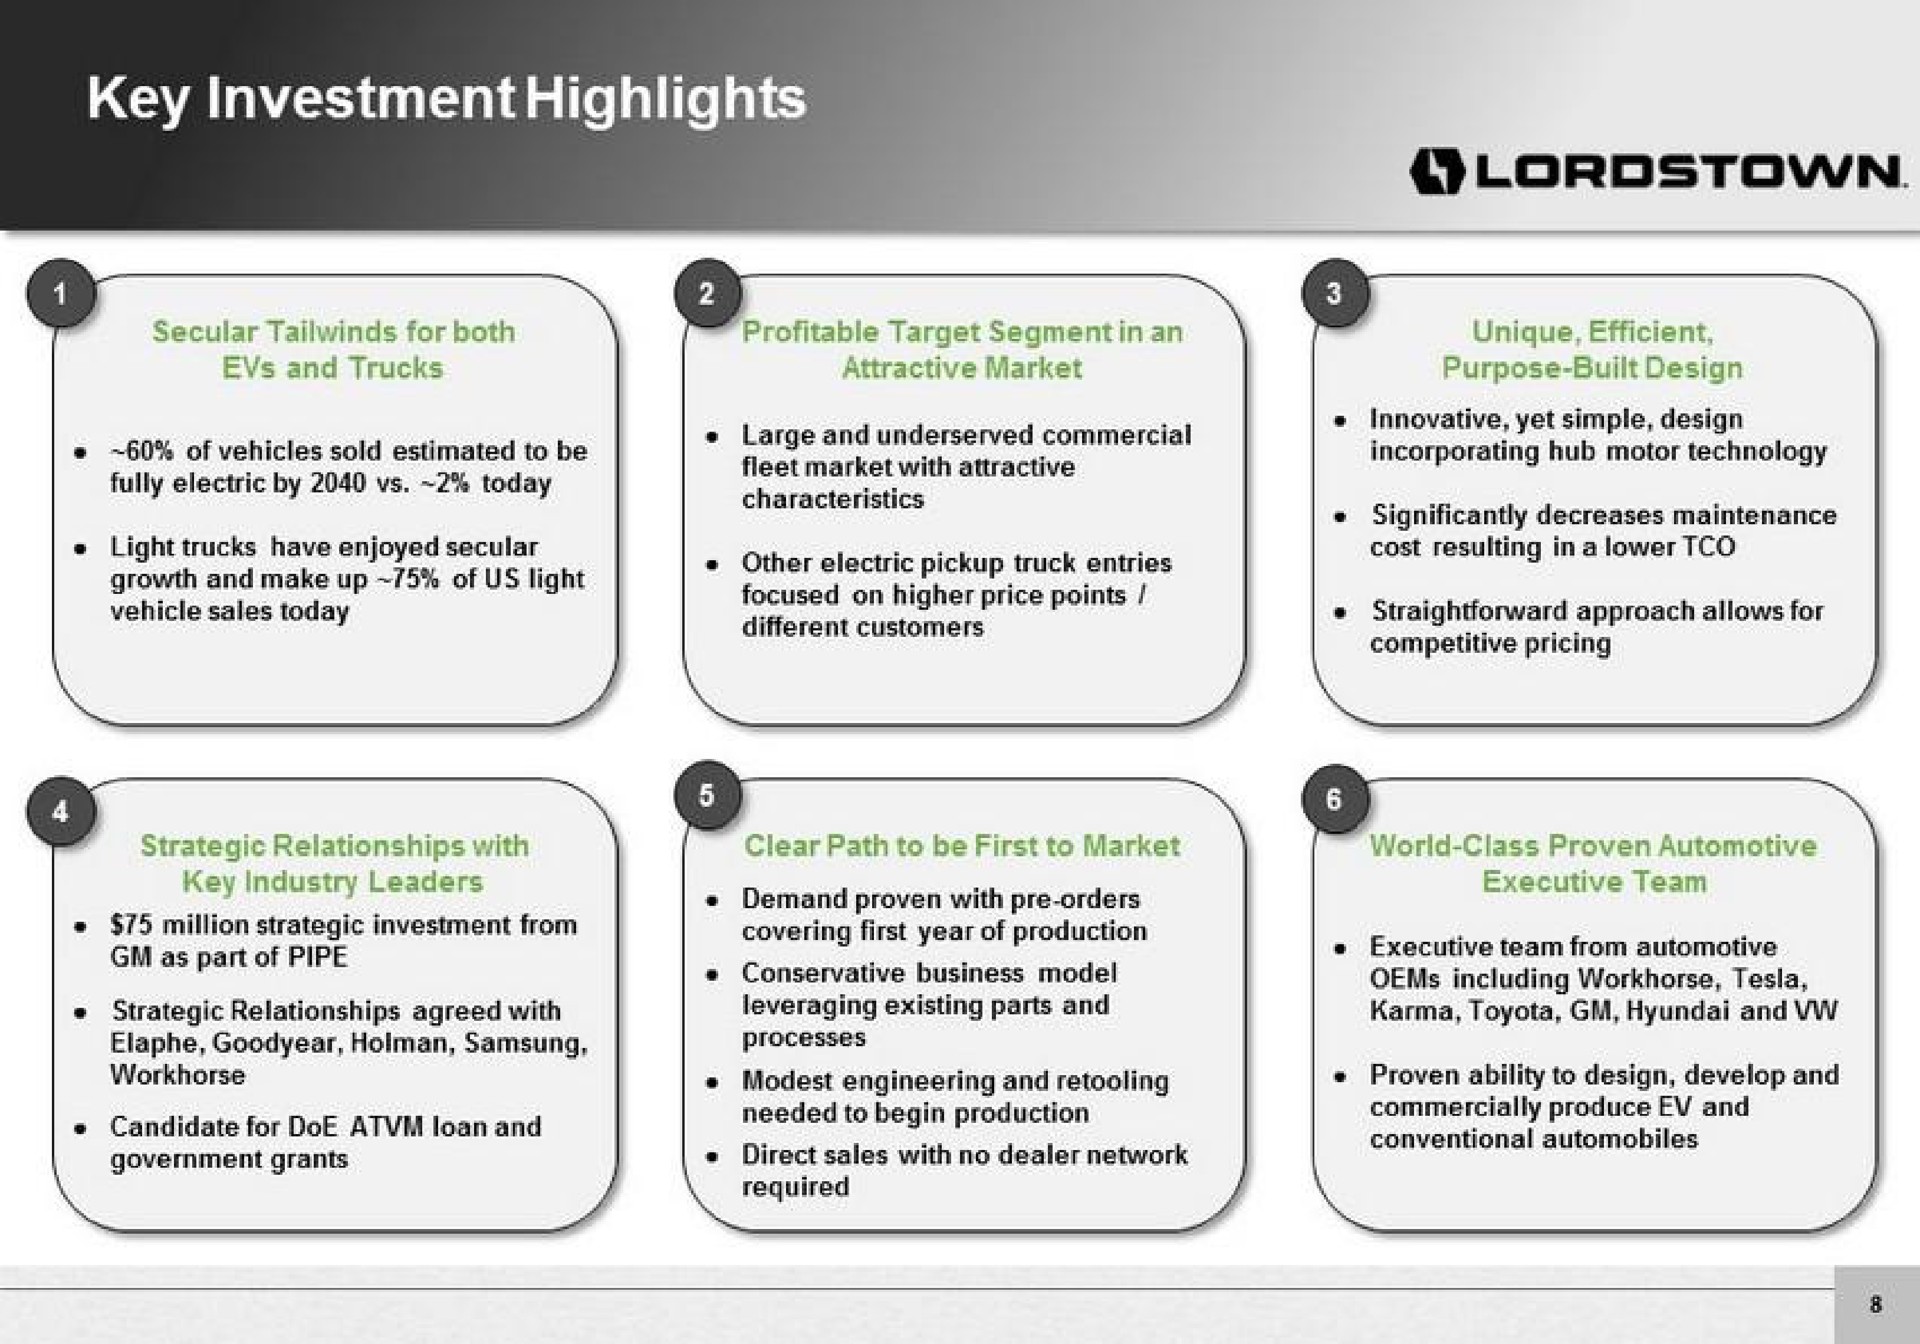 key investment highlights | Lordstown Motors